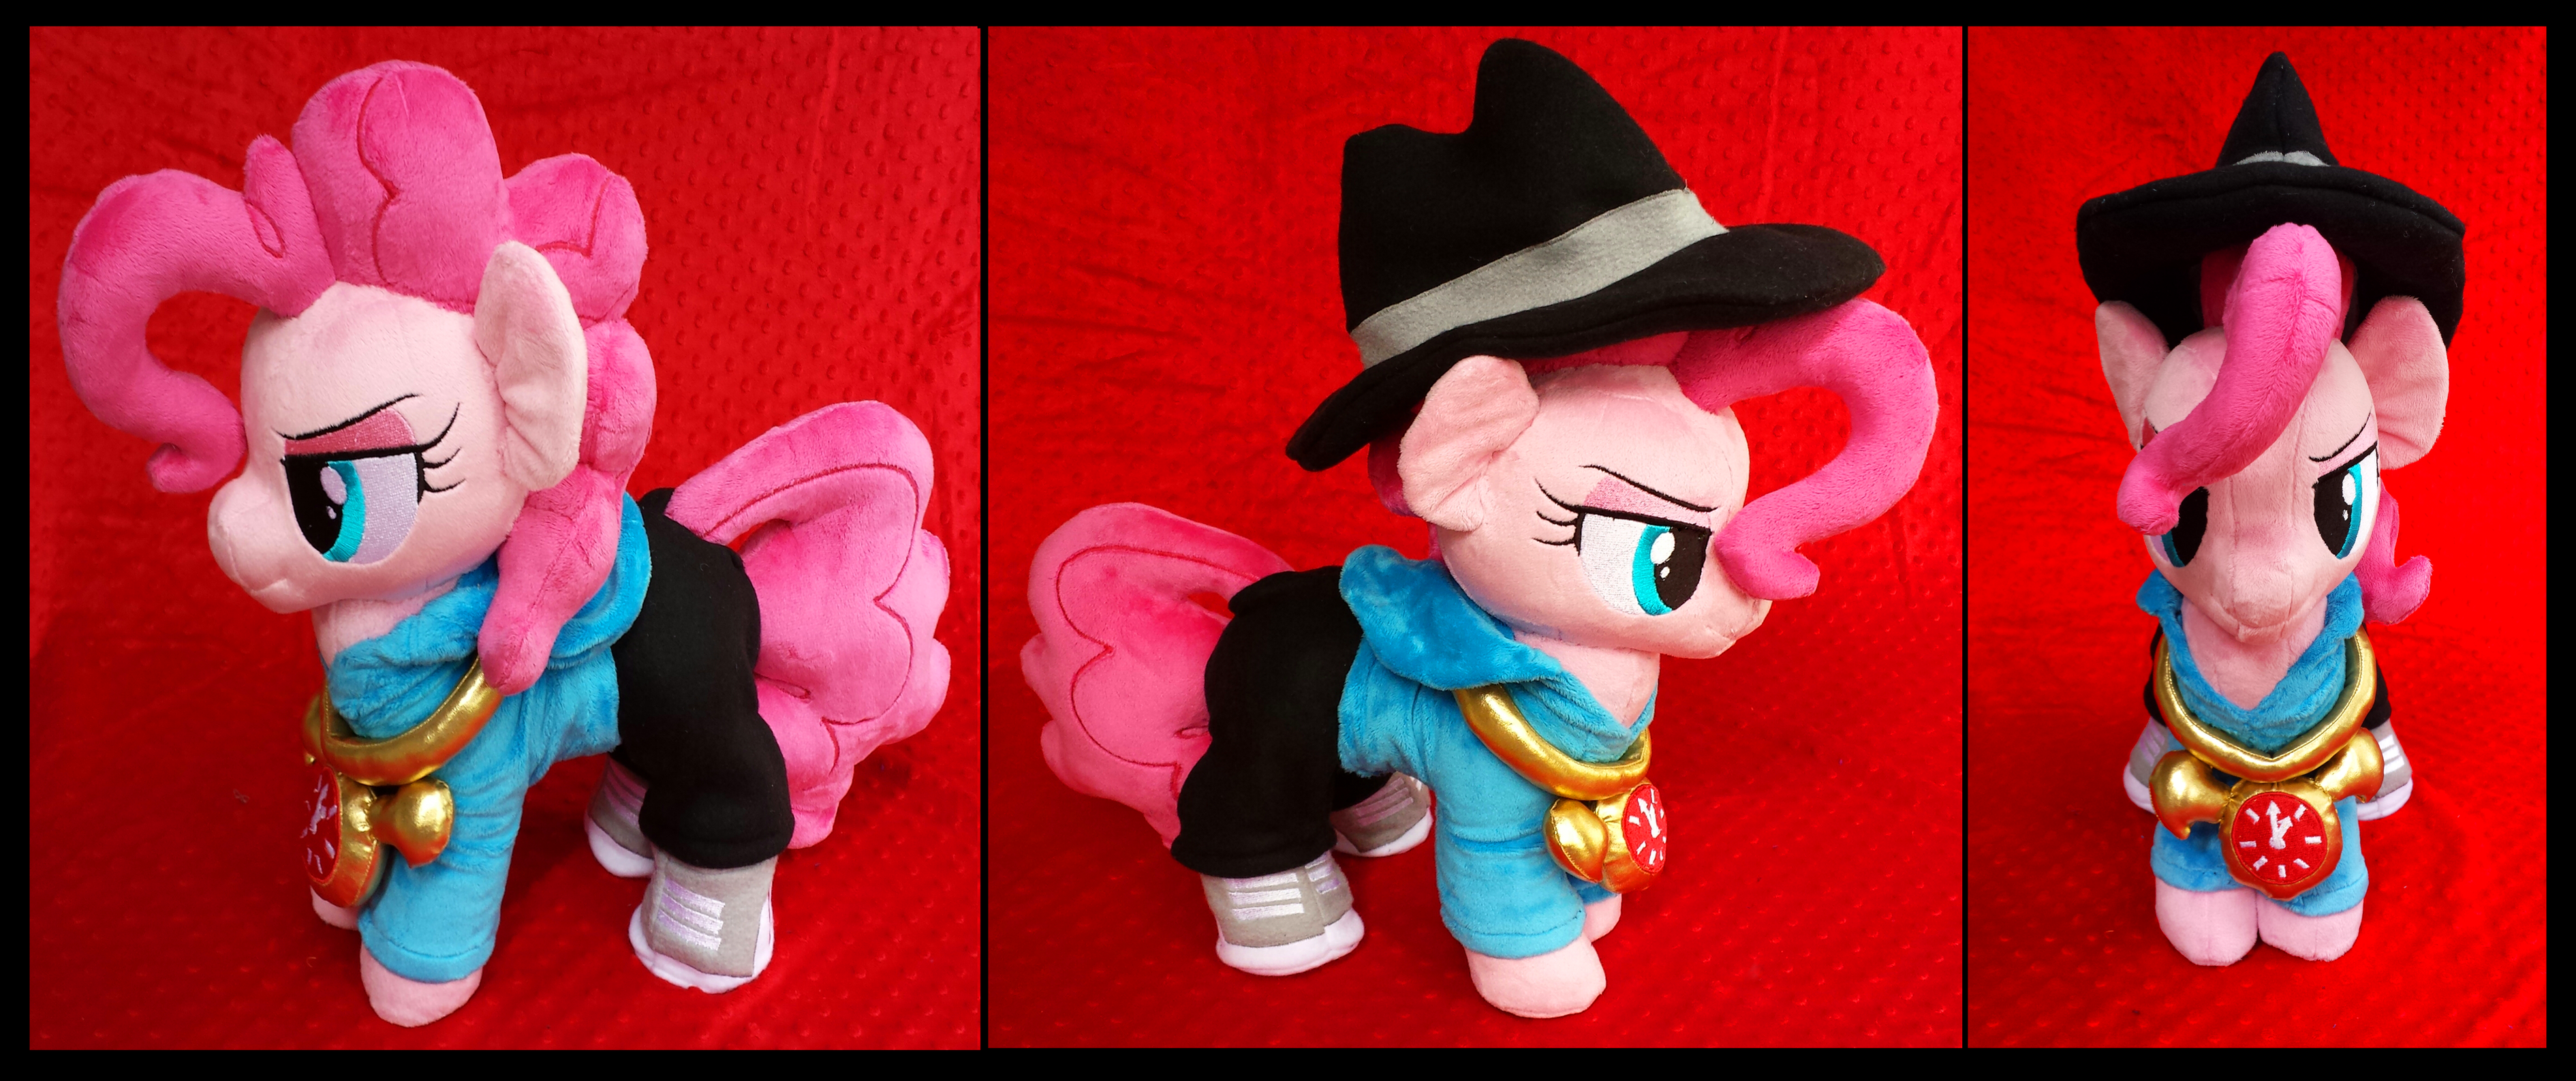 https://derpicdn.net/img/view/2014/5/13/625736__safe_solo_pinkie+pie_clothes_plushie_hat_irl_craft_testing+testing+1-dash-2-dash-3_spoiler-colon-s04e21.png